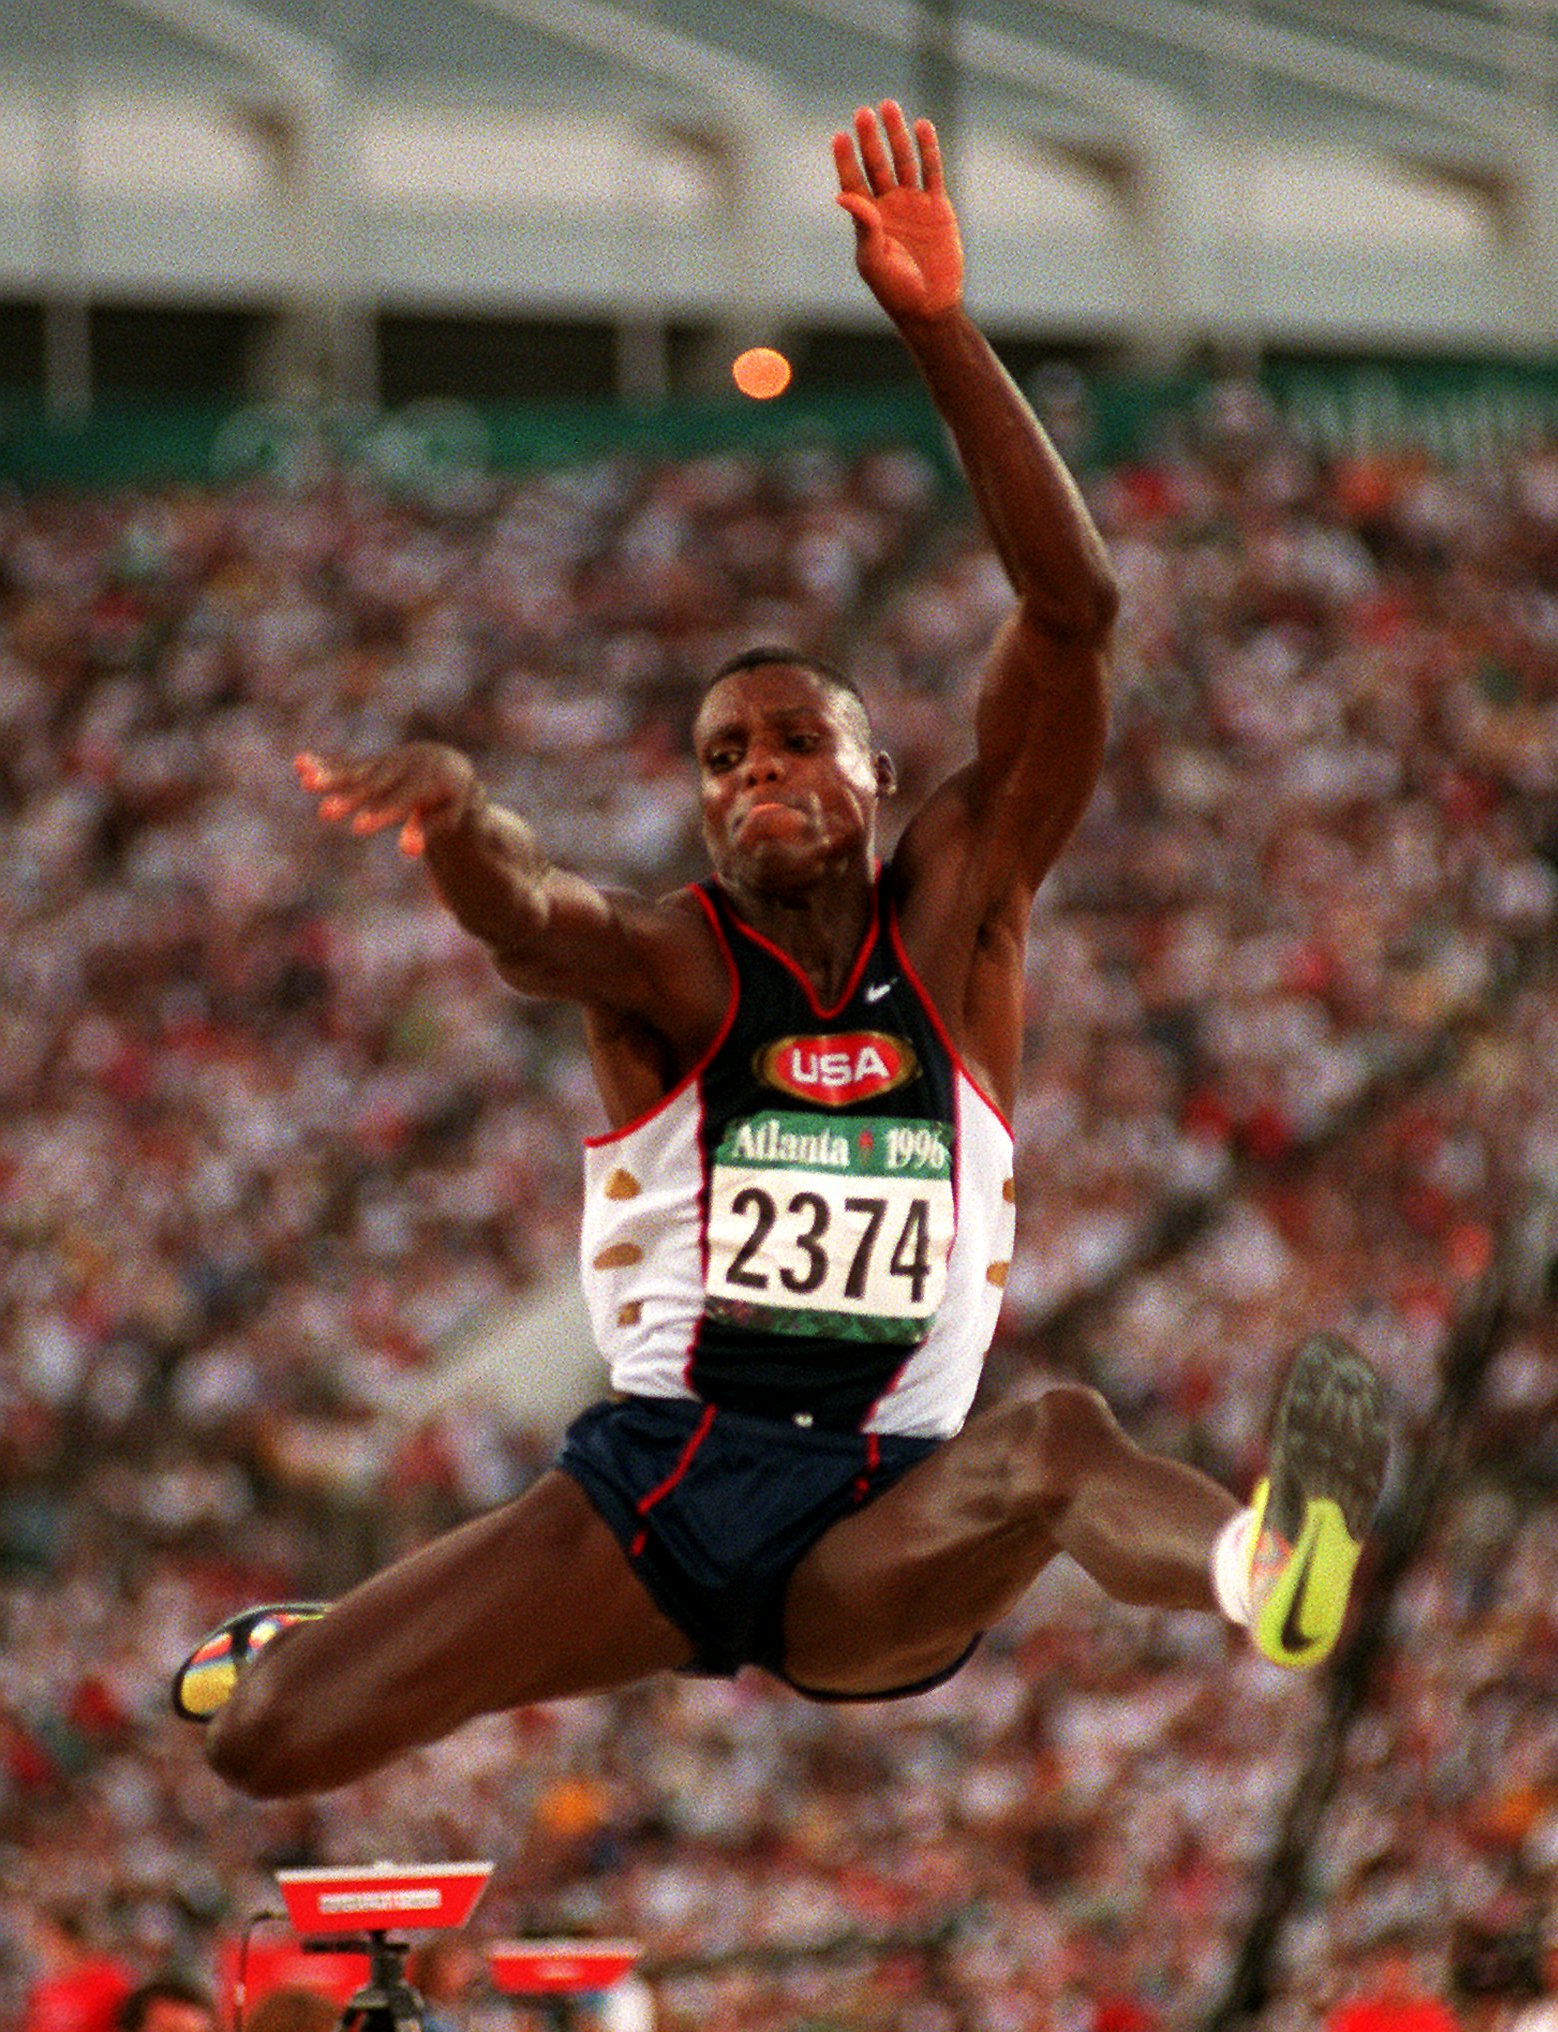 Carl Lewis of the United States takes his third jump during the men's long jump final at the 1996 Summer Olympic Games in Atlanta, Monday, July 29, 1996. Lewis won the gold medal. (AP Photo/Lynne Sladky)